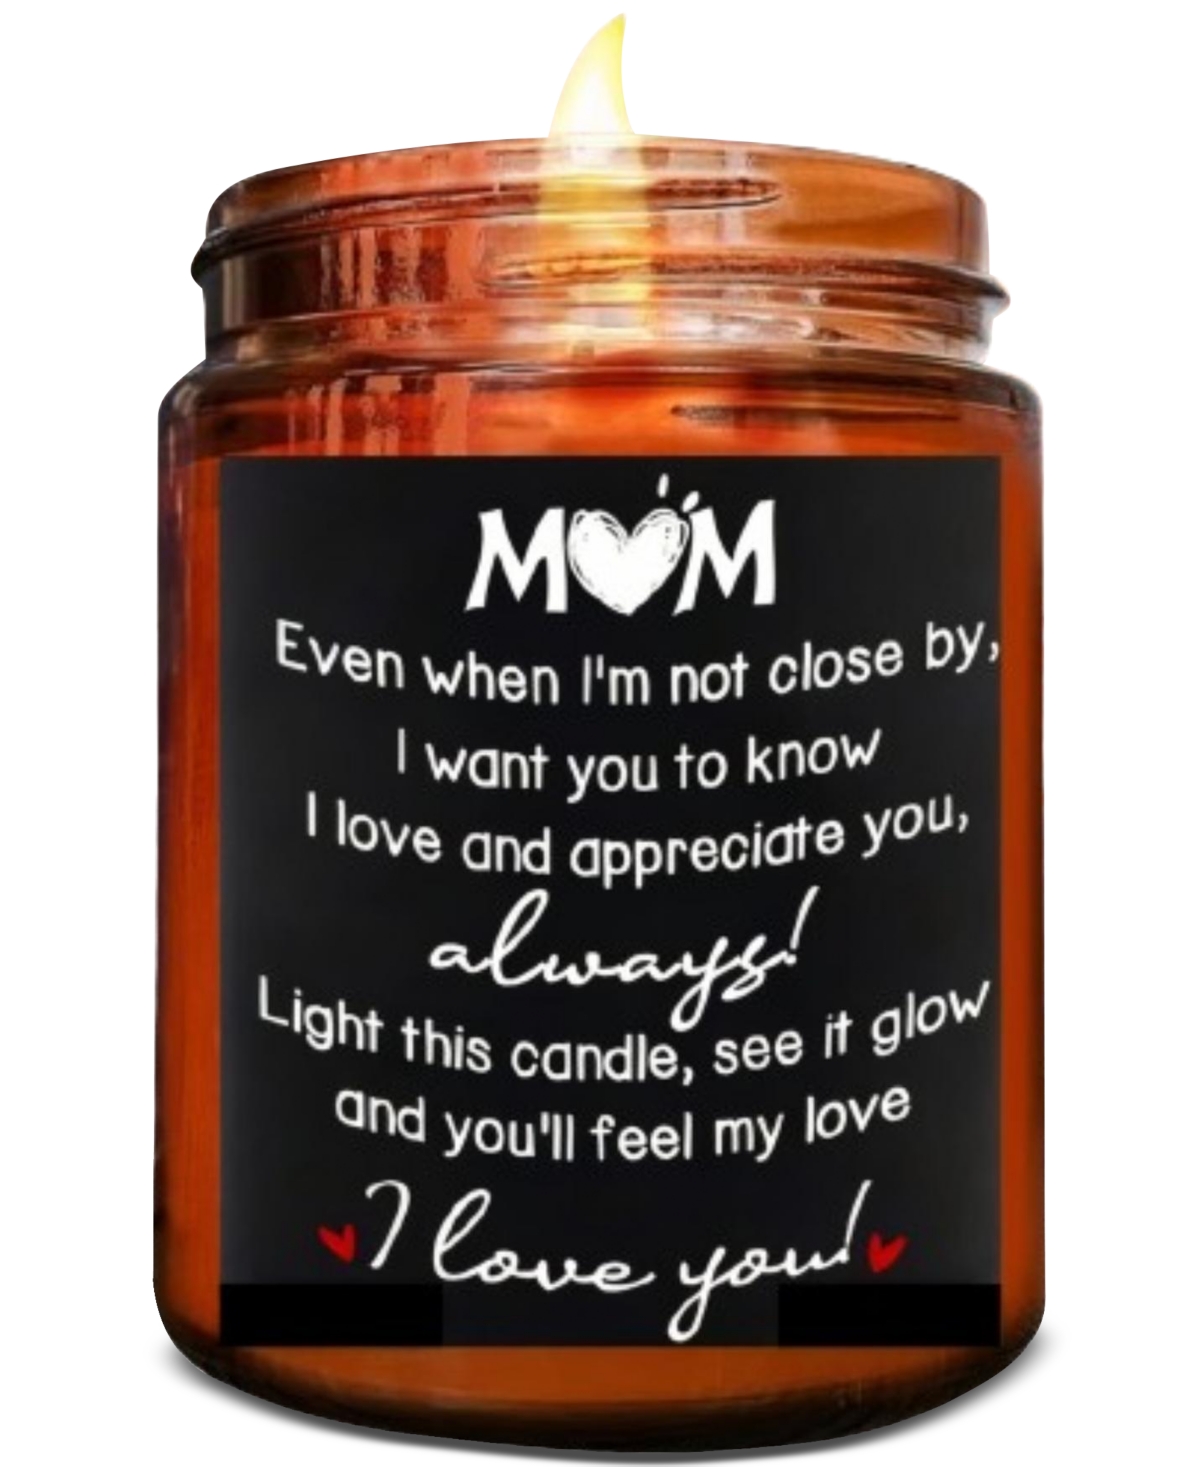 "Love You Mom" Lavender-Scented Soy Wax Candle, 10 oz.